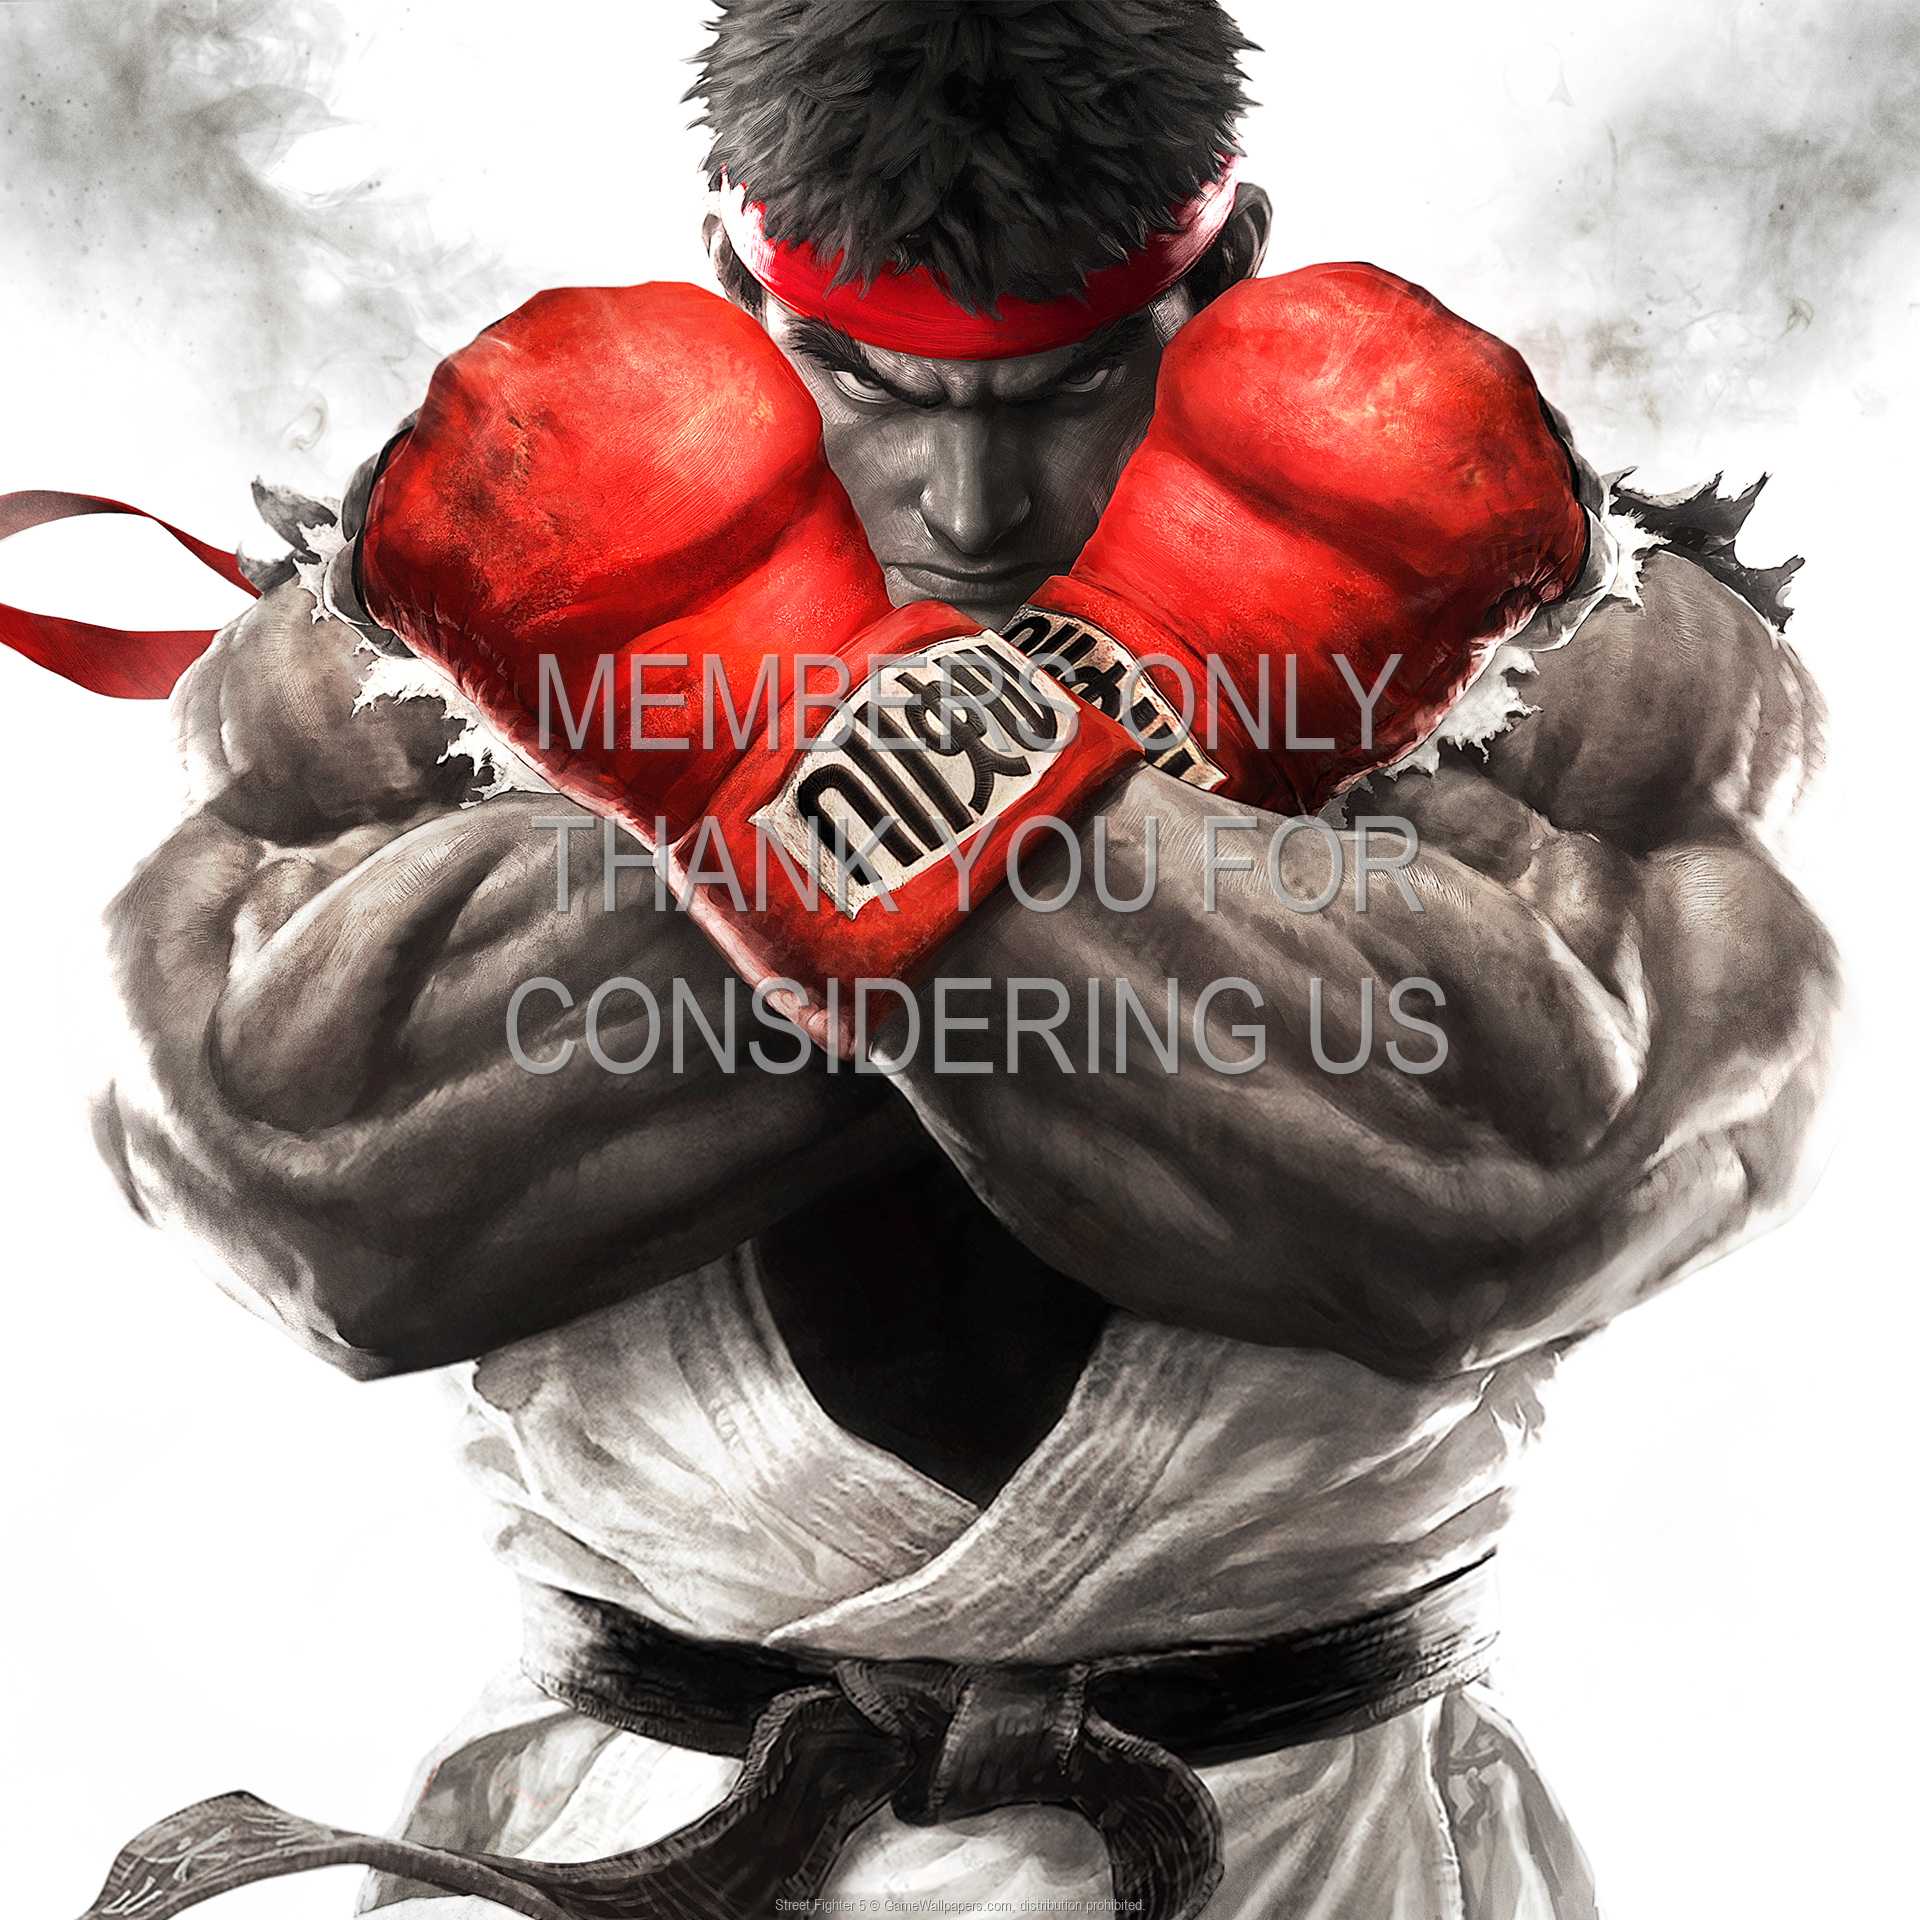 Street Fighter 5 1080p%20Horizontal Mobile wallpaper or background 01